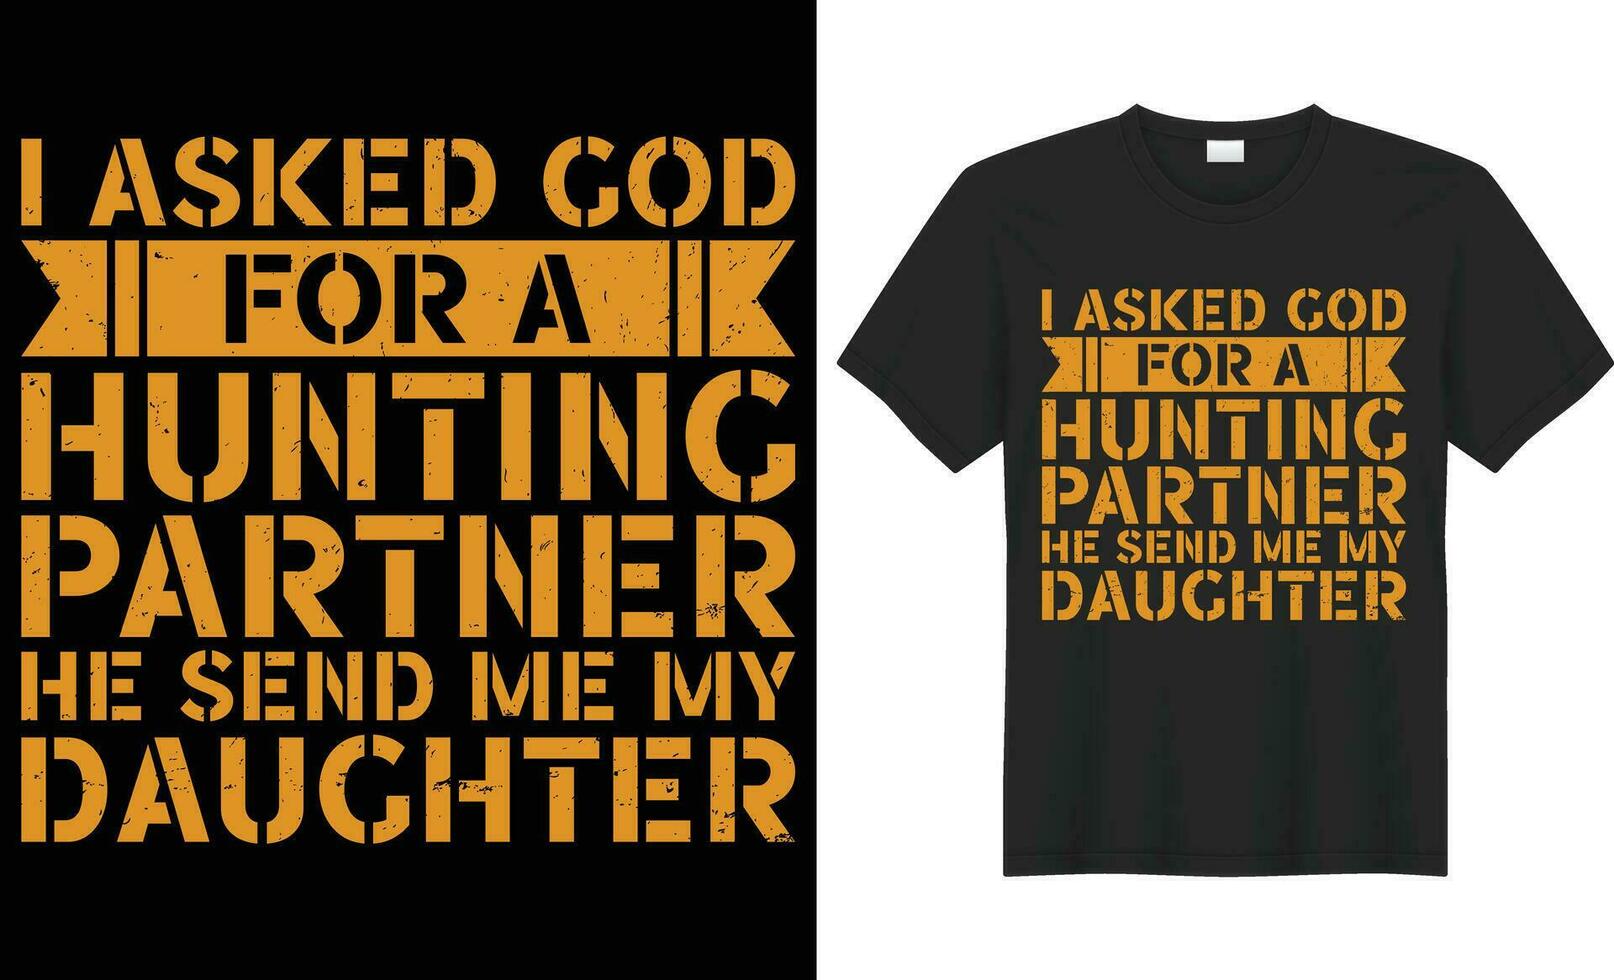 I asked god for a hunting partner he send me my daughter typography vector tshirt Design. Perfect for print item bag, poster, sticker, template. Handwritten illustration. Isolated on black background.